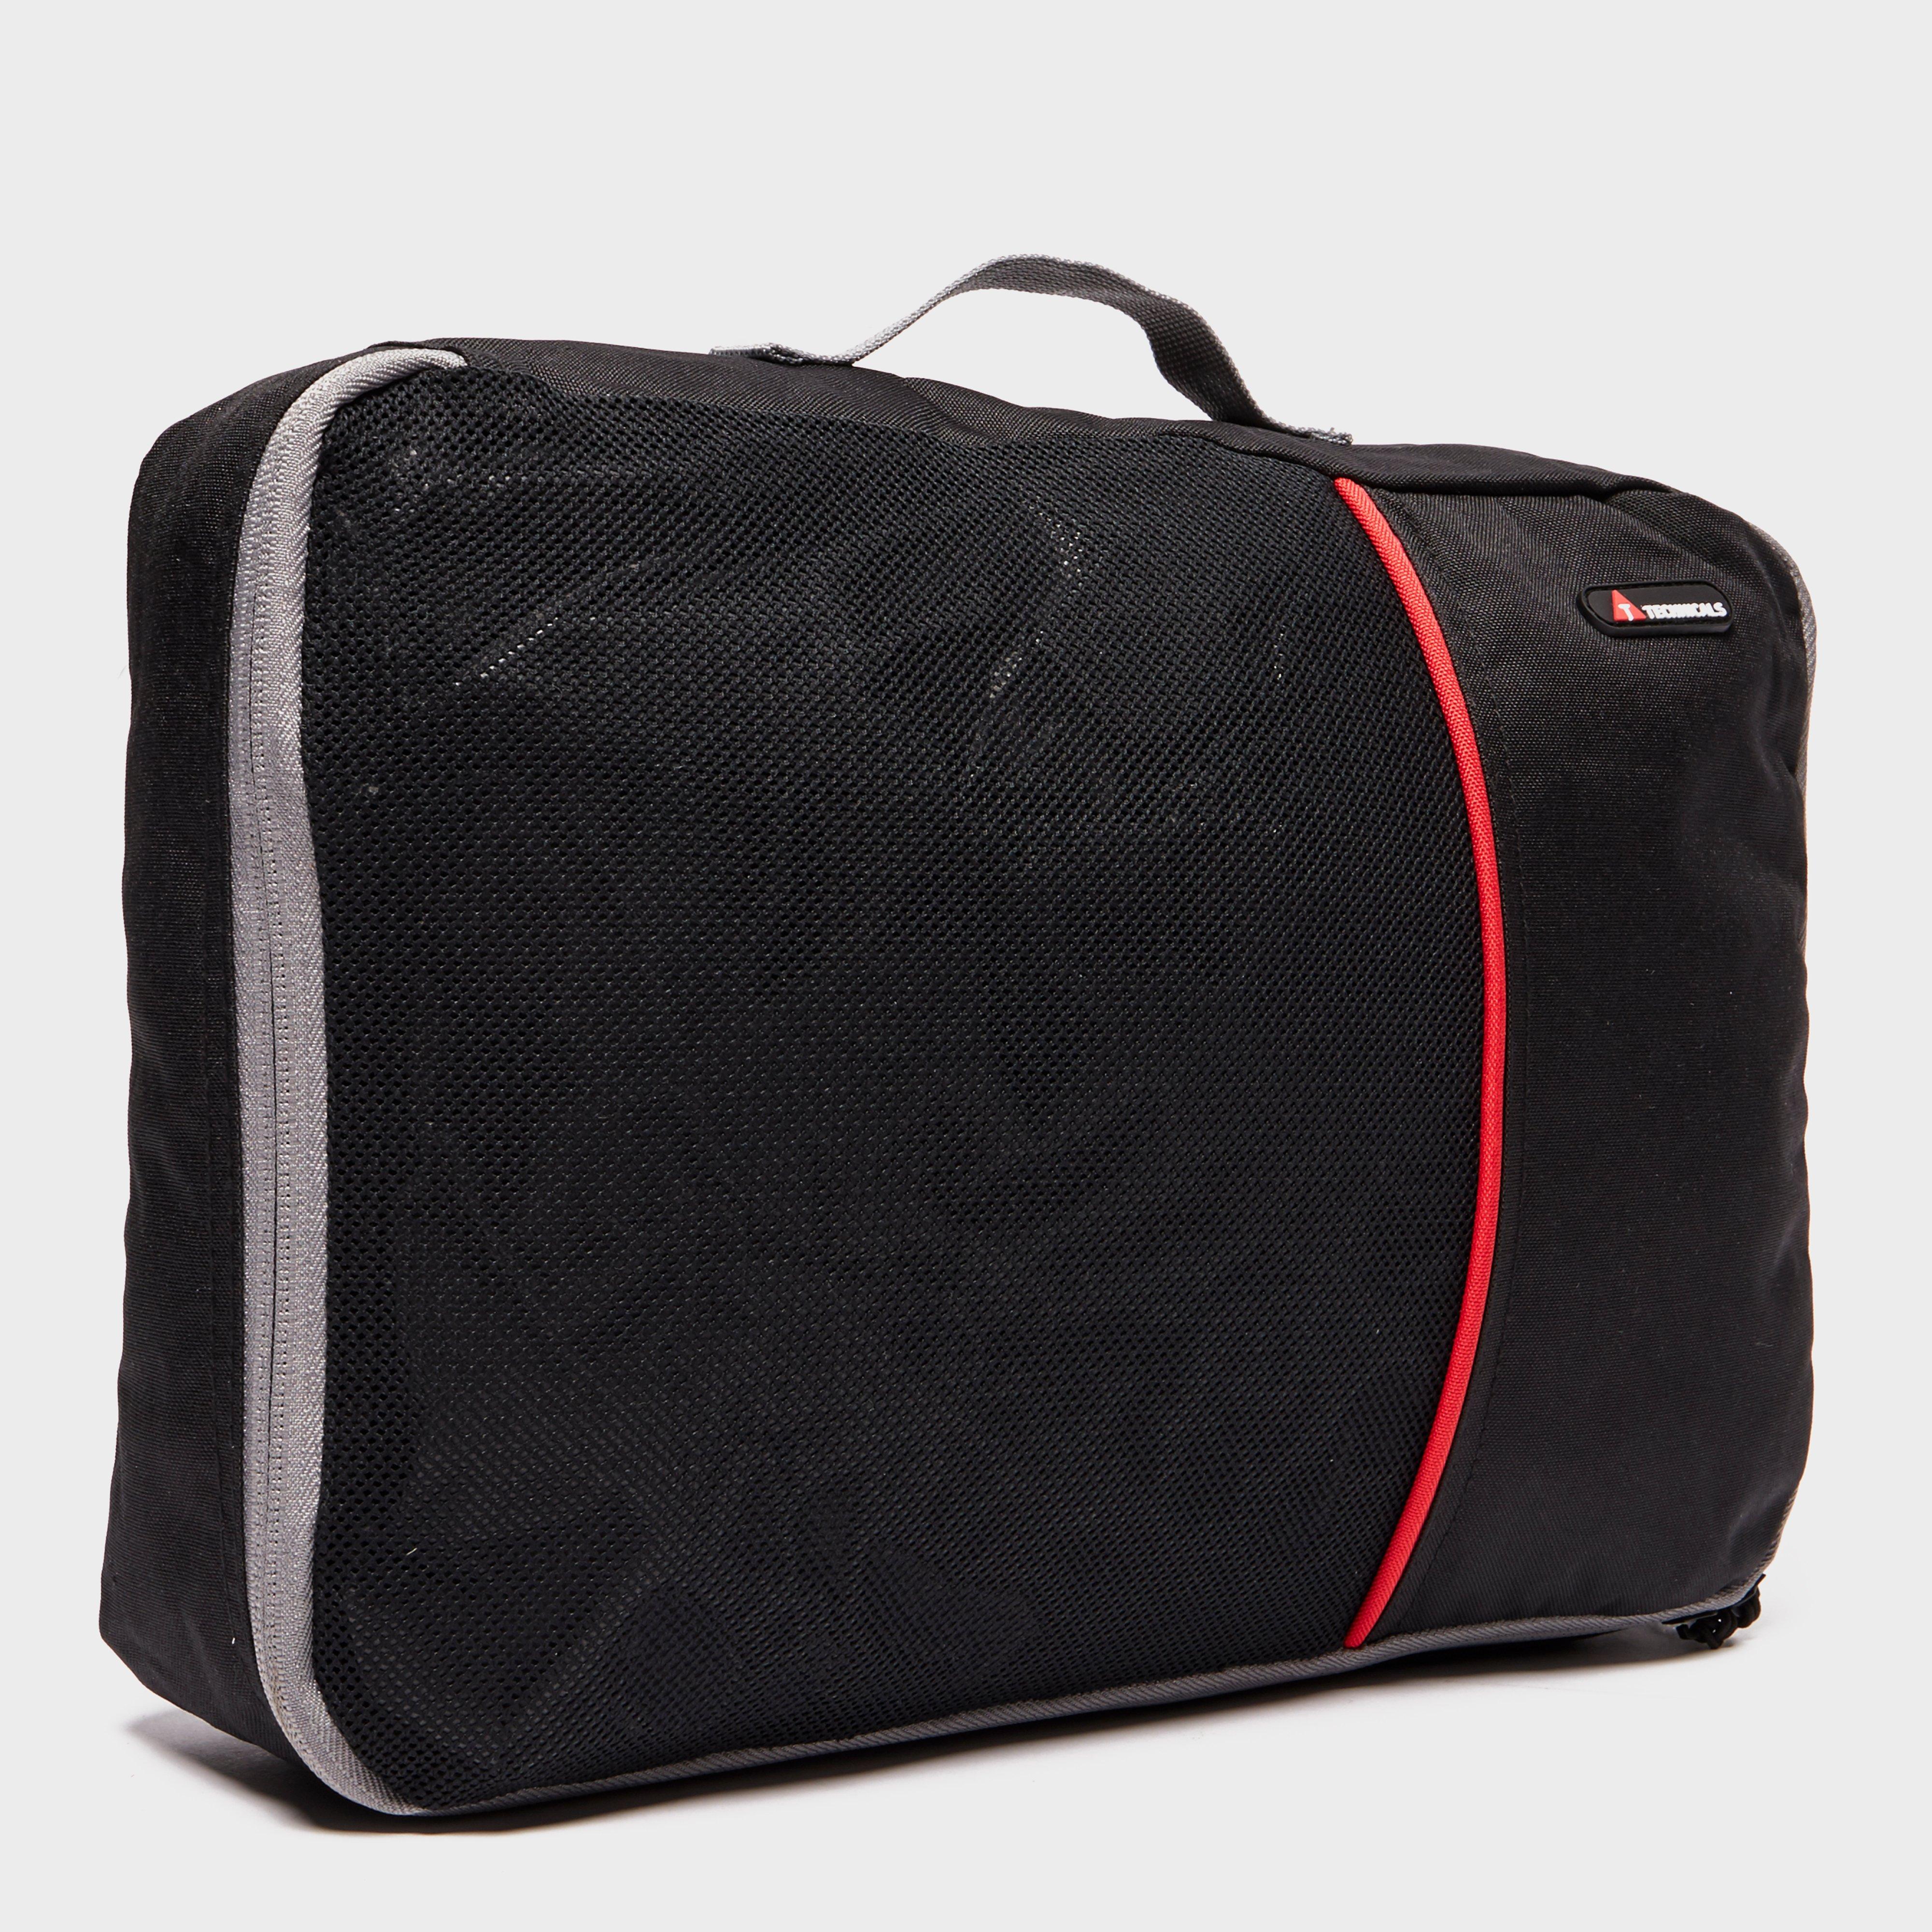 Technicals Packing Cube - Full Size - Black/blk  Black/blk